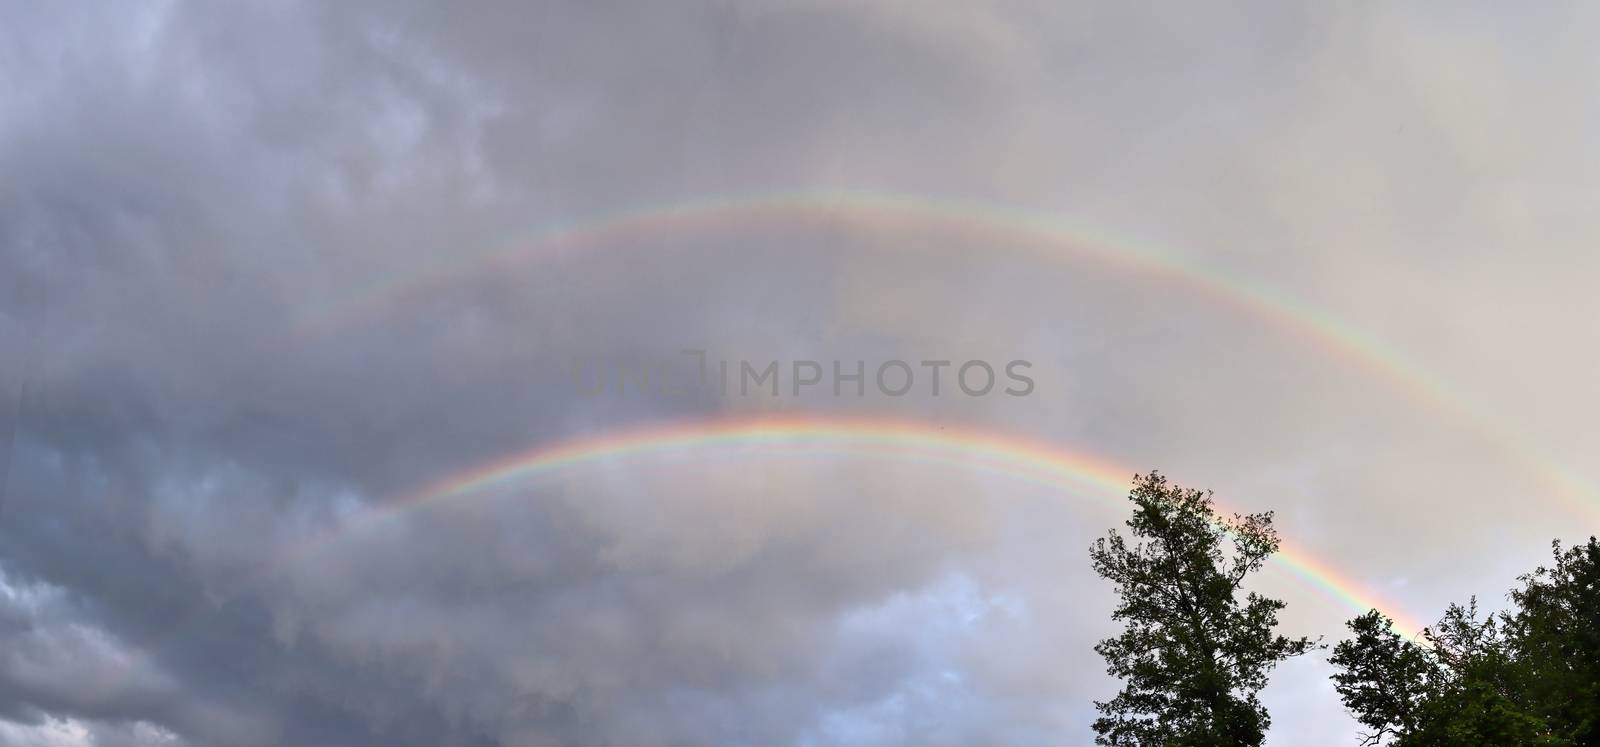 Stunning natural double rainbows plus supernumerary bows seen at by MP_foto71